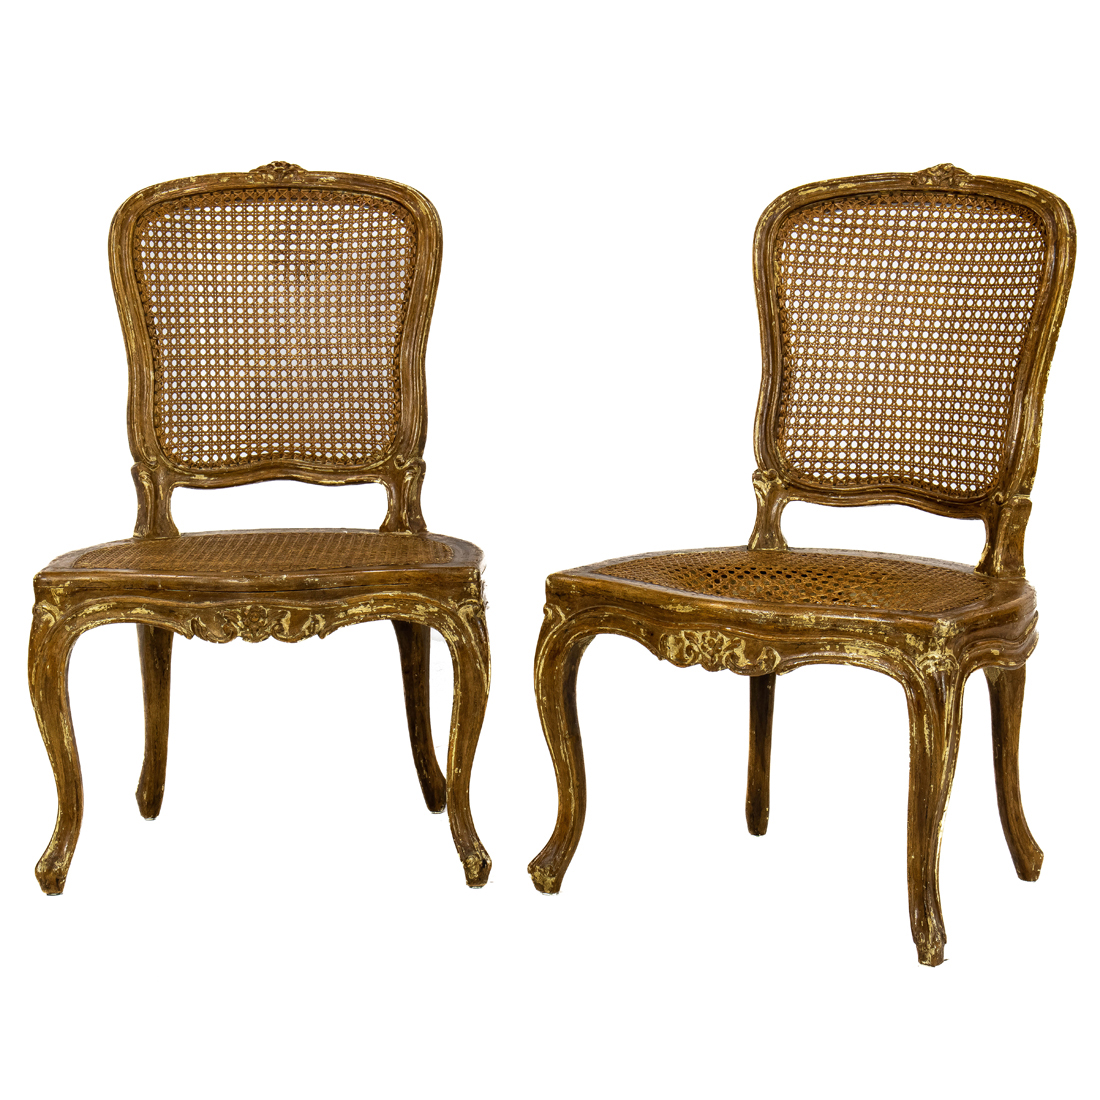 PAIR OF LOUIS XV SIDE CHAIRS Pair